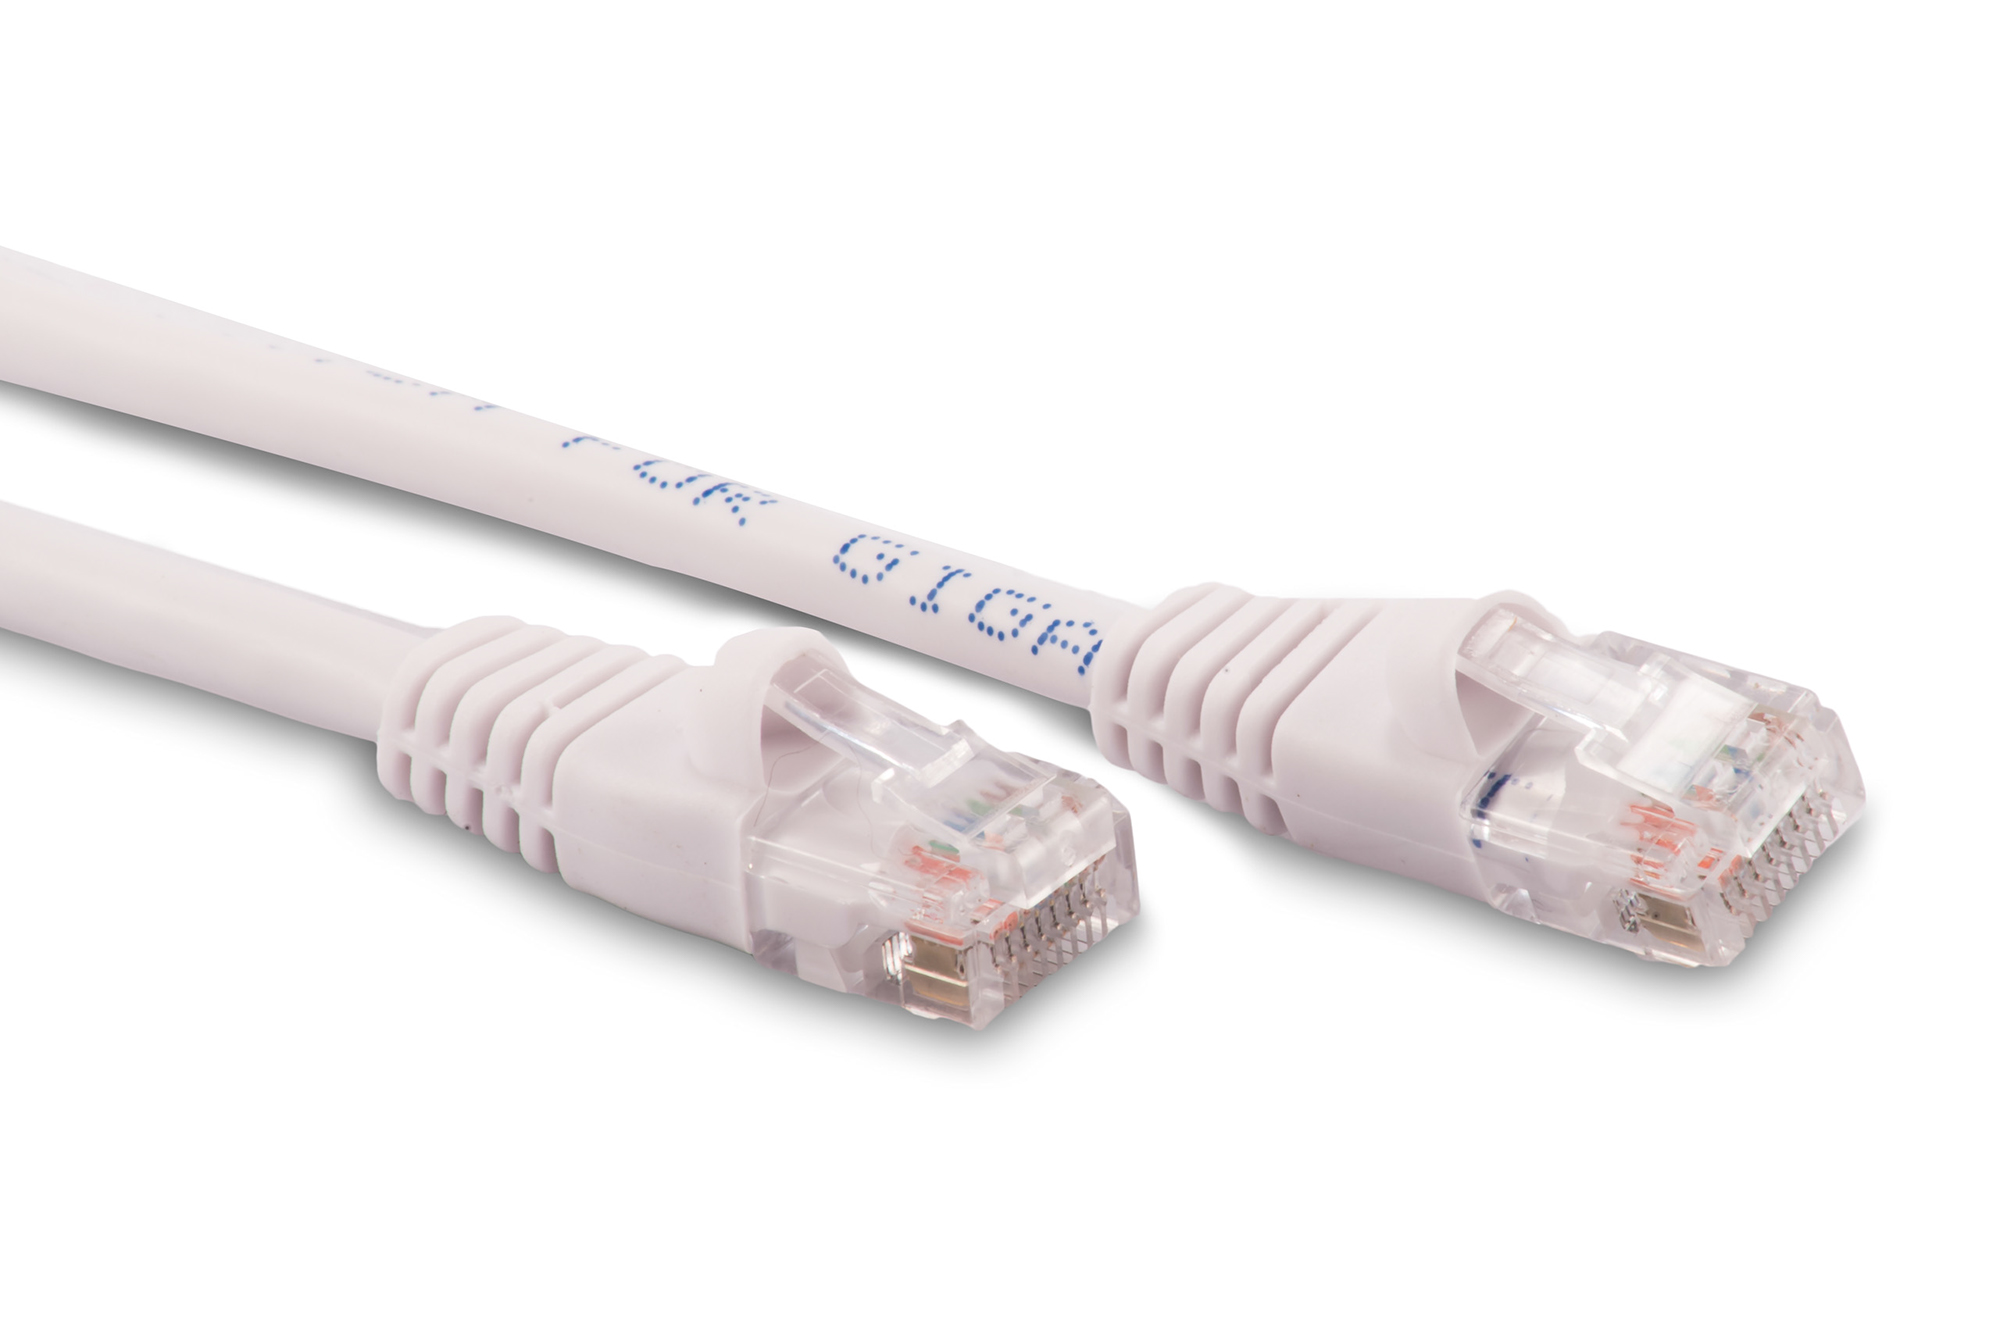 50ft Cat5e Ethernet Patch Cable - White Color - Snagless Boot